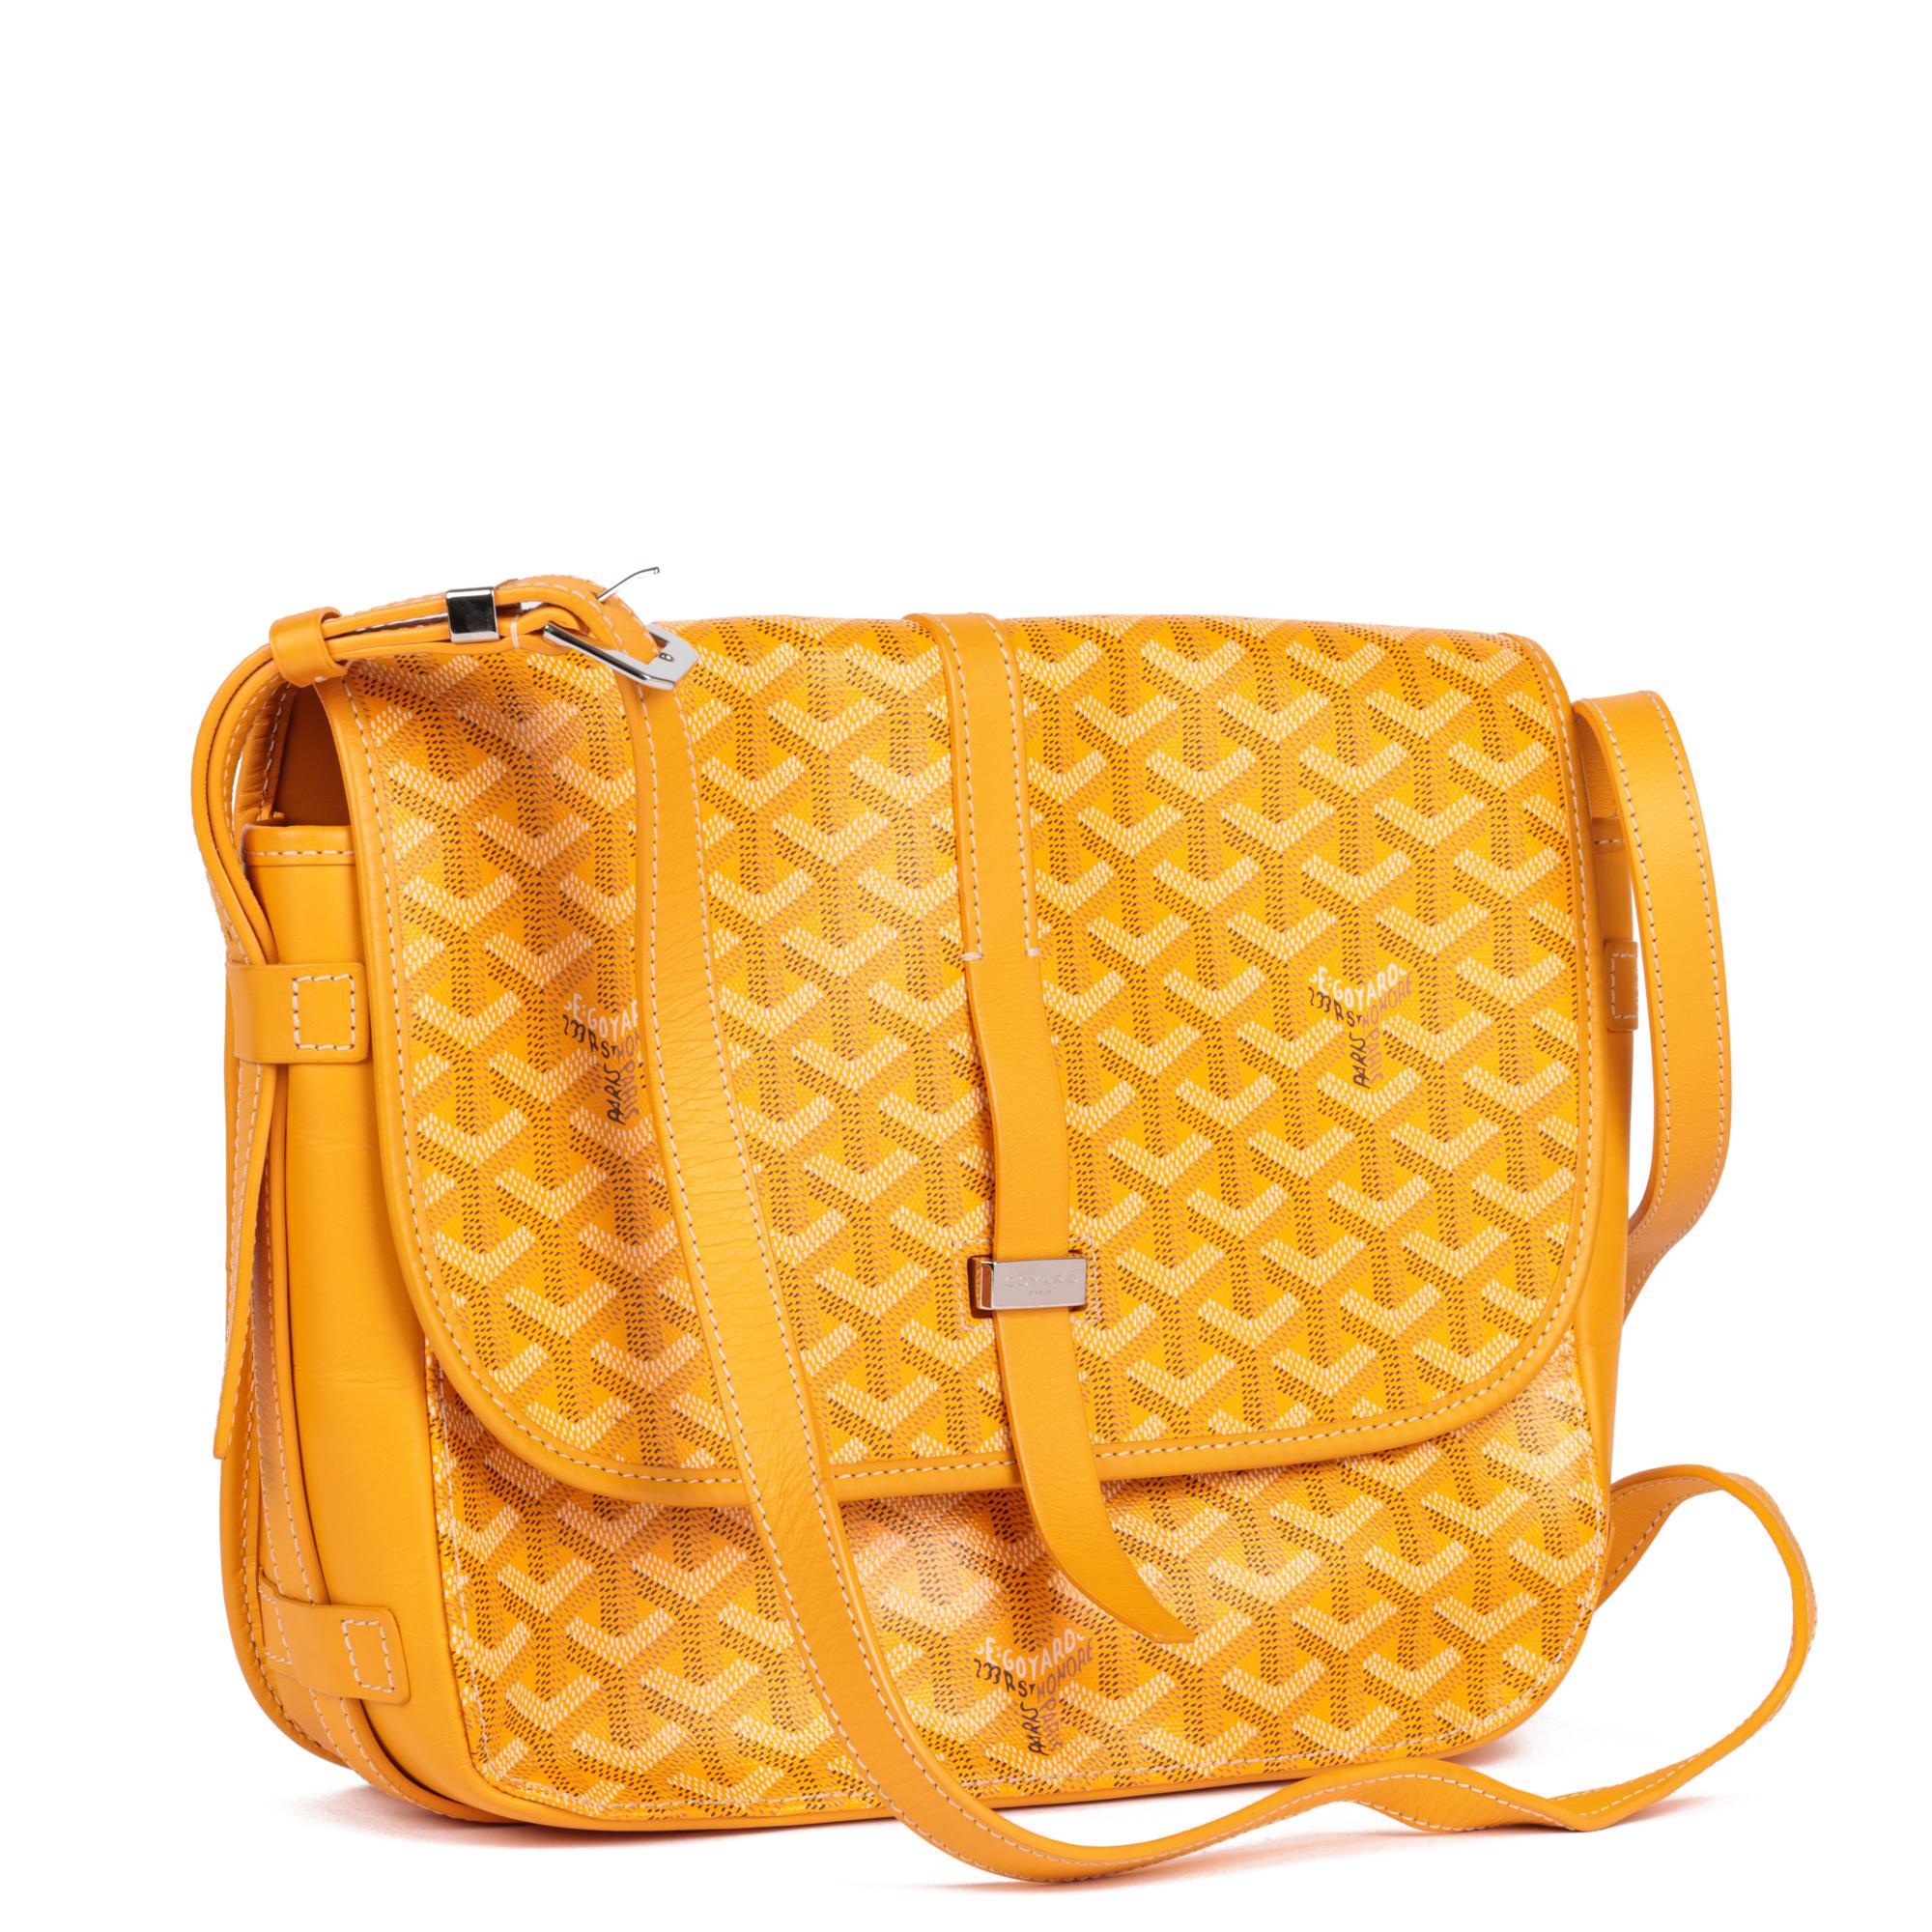 GOYARD
Yellow Chevron Coated Canvas & Calfskin Belvedere II MM

Xupes Reference: HB5203
Serial Number: ABA020191
Age (Circa): 2020
Accompanied By: Goyard Dust Bag, Protective Felt
Authenticity Details: Date Stamp (Made in France)
Gender: